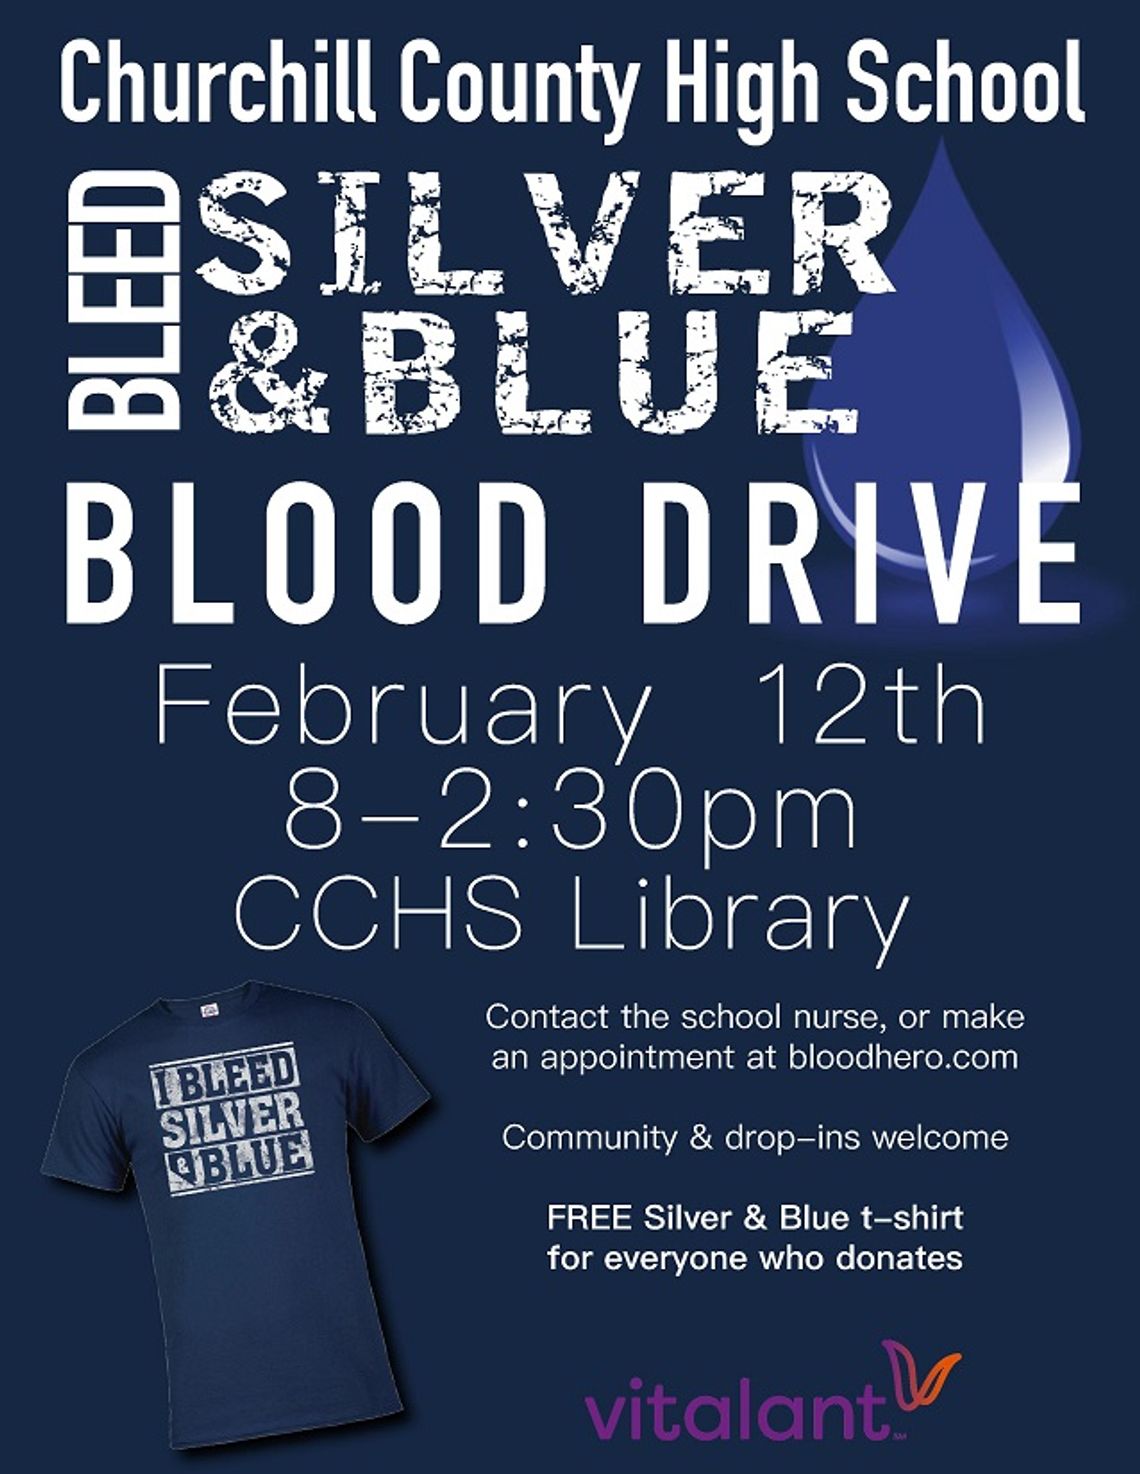 Blood Drive Tuesday the 12th at CCHS Library